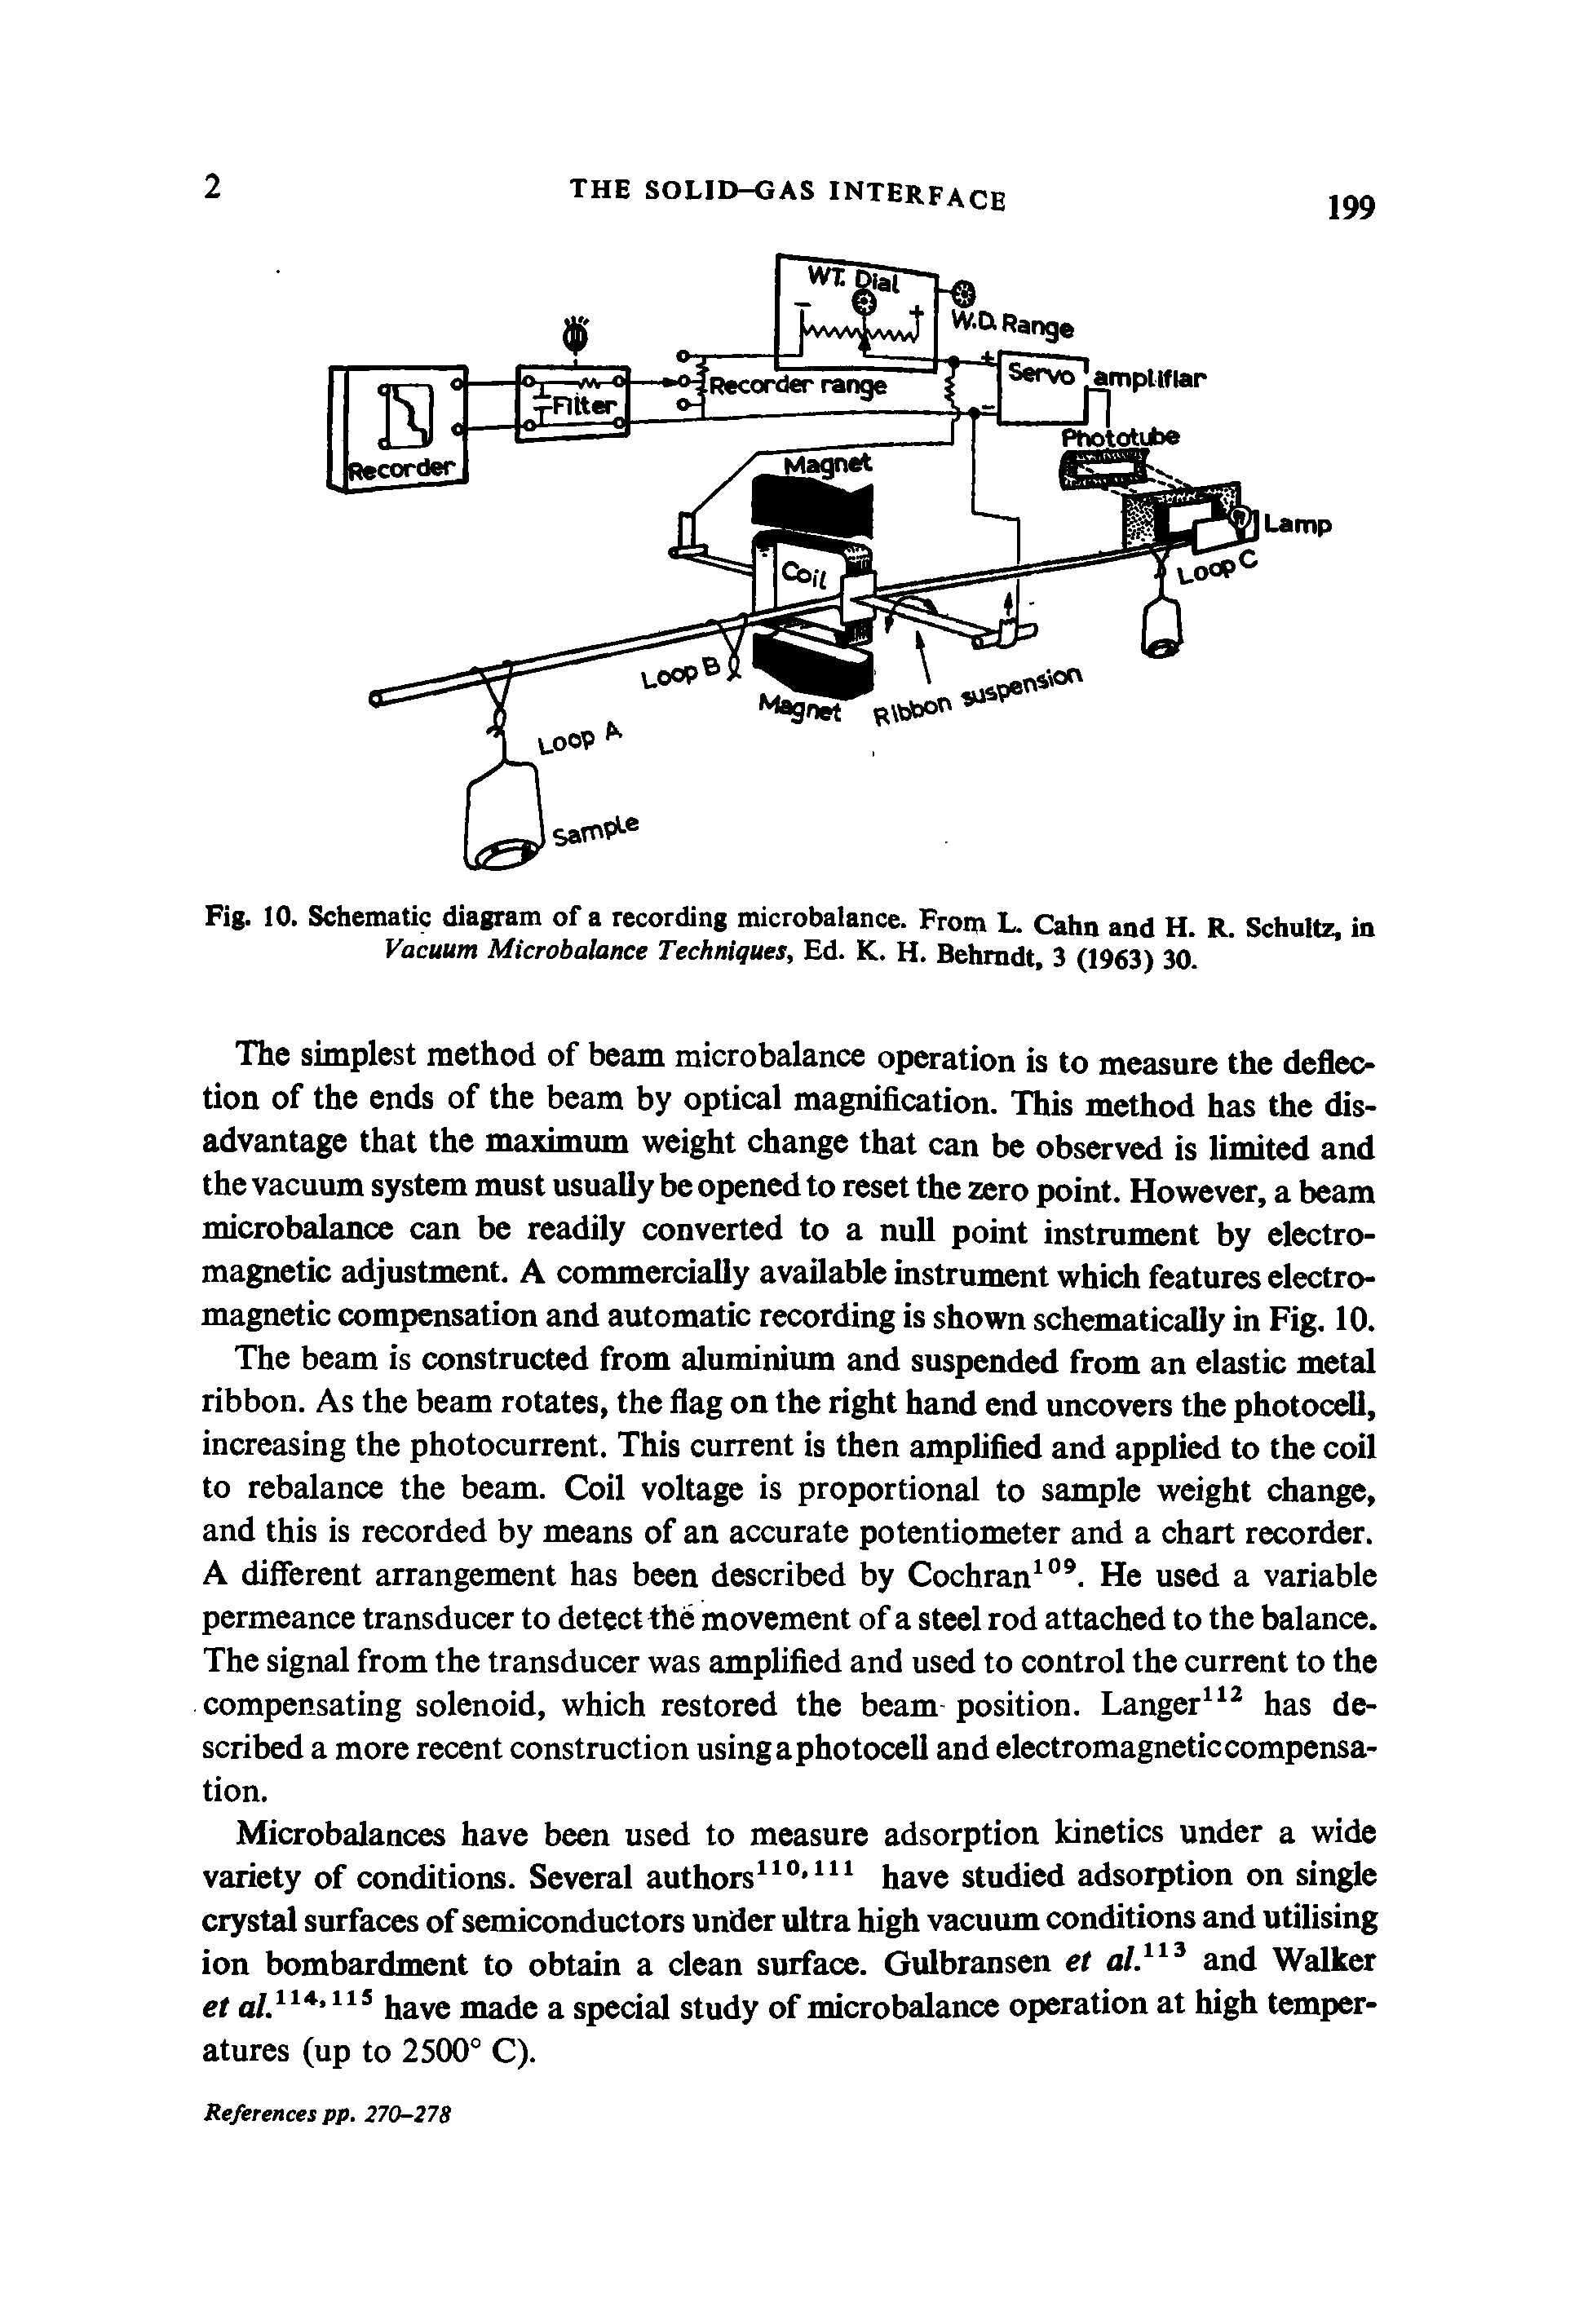 Fig. 10. Schematic diagram of a recording microbalance. From L. Cahn and H. R. Schultz, in Vacuum Microbalance Techniques, Ed. K. H. Behmdt, 3 (1963) 30.